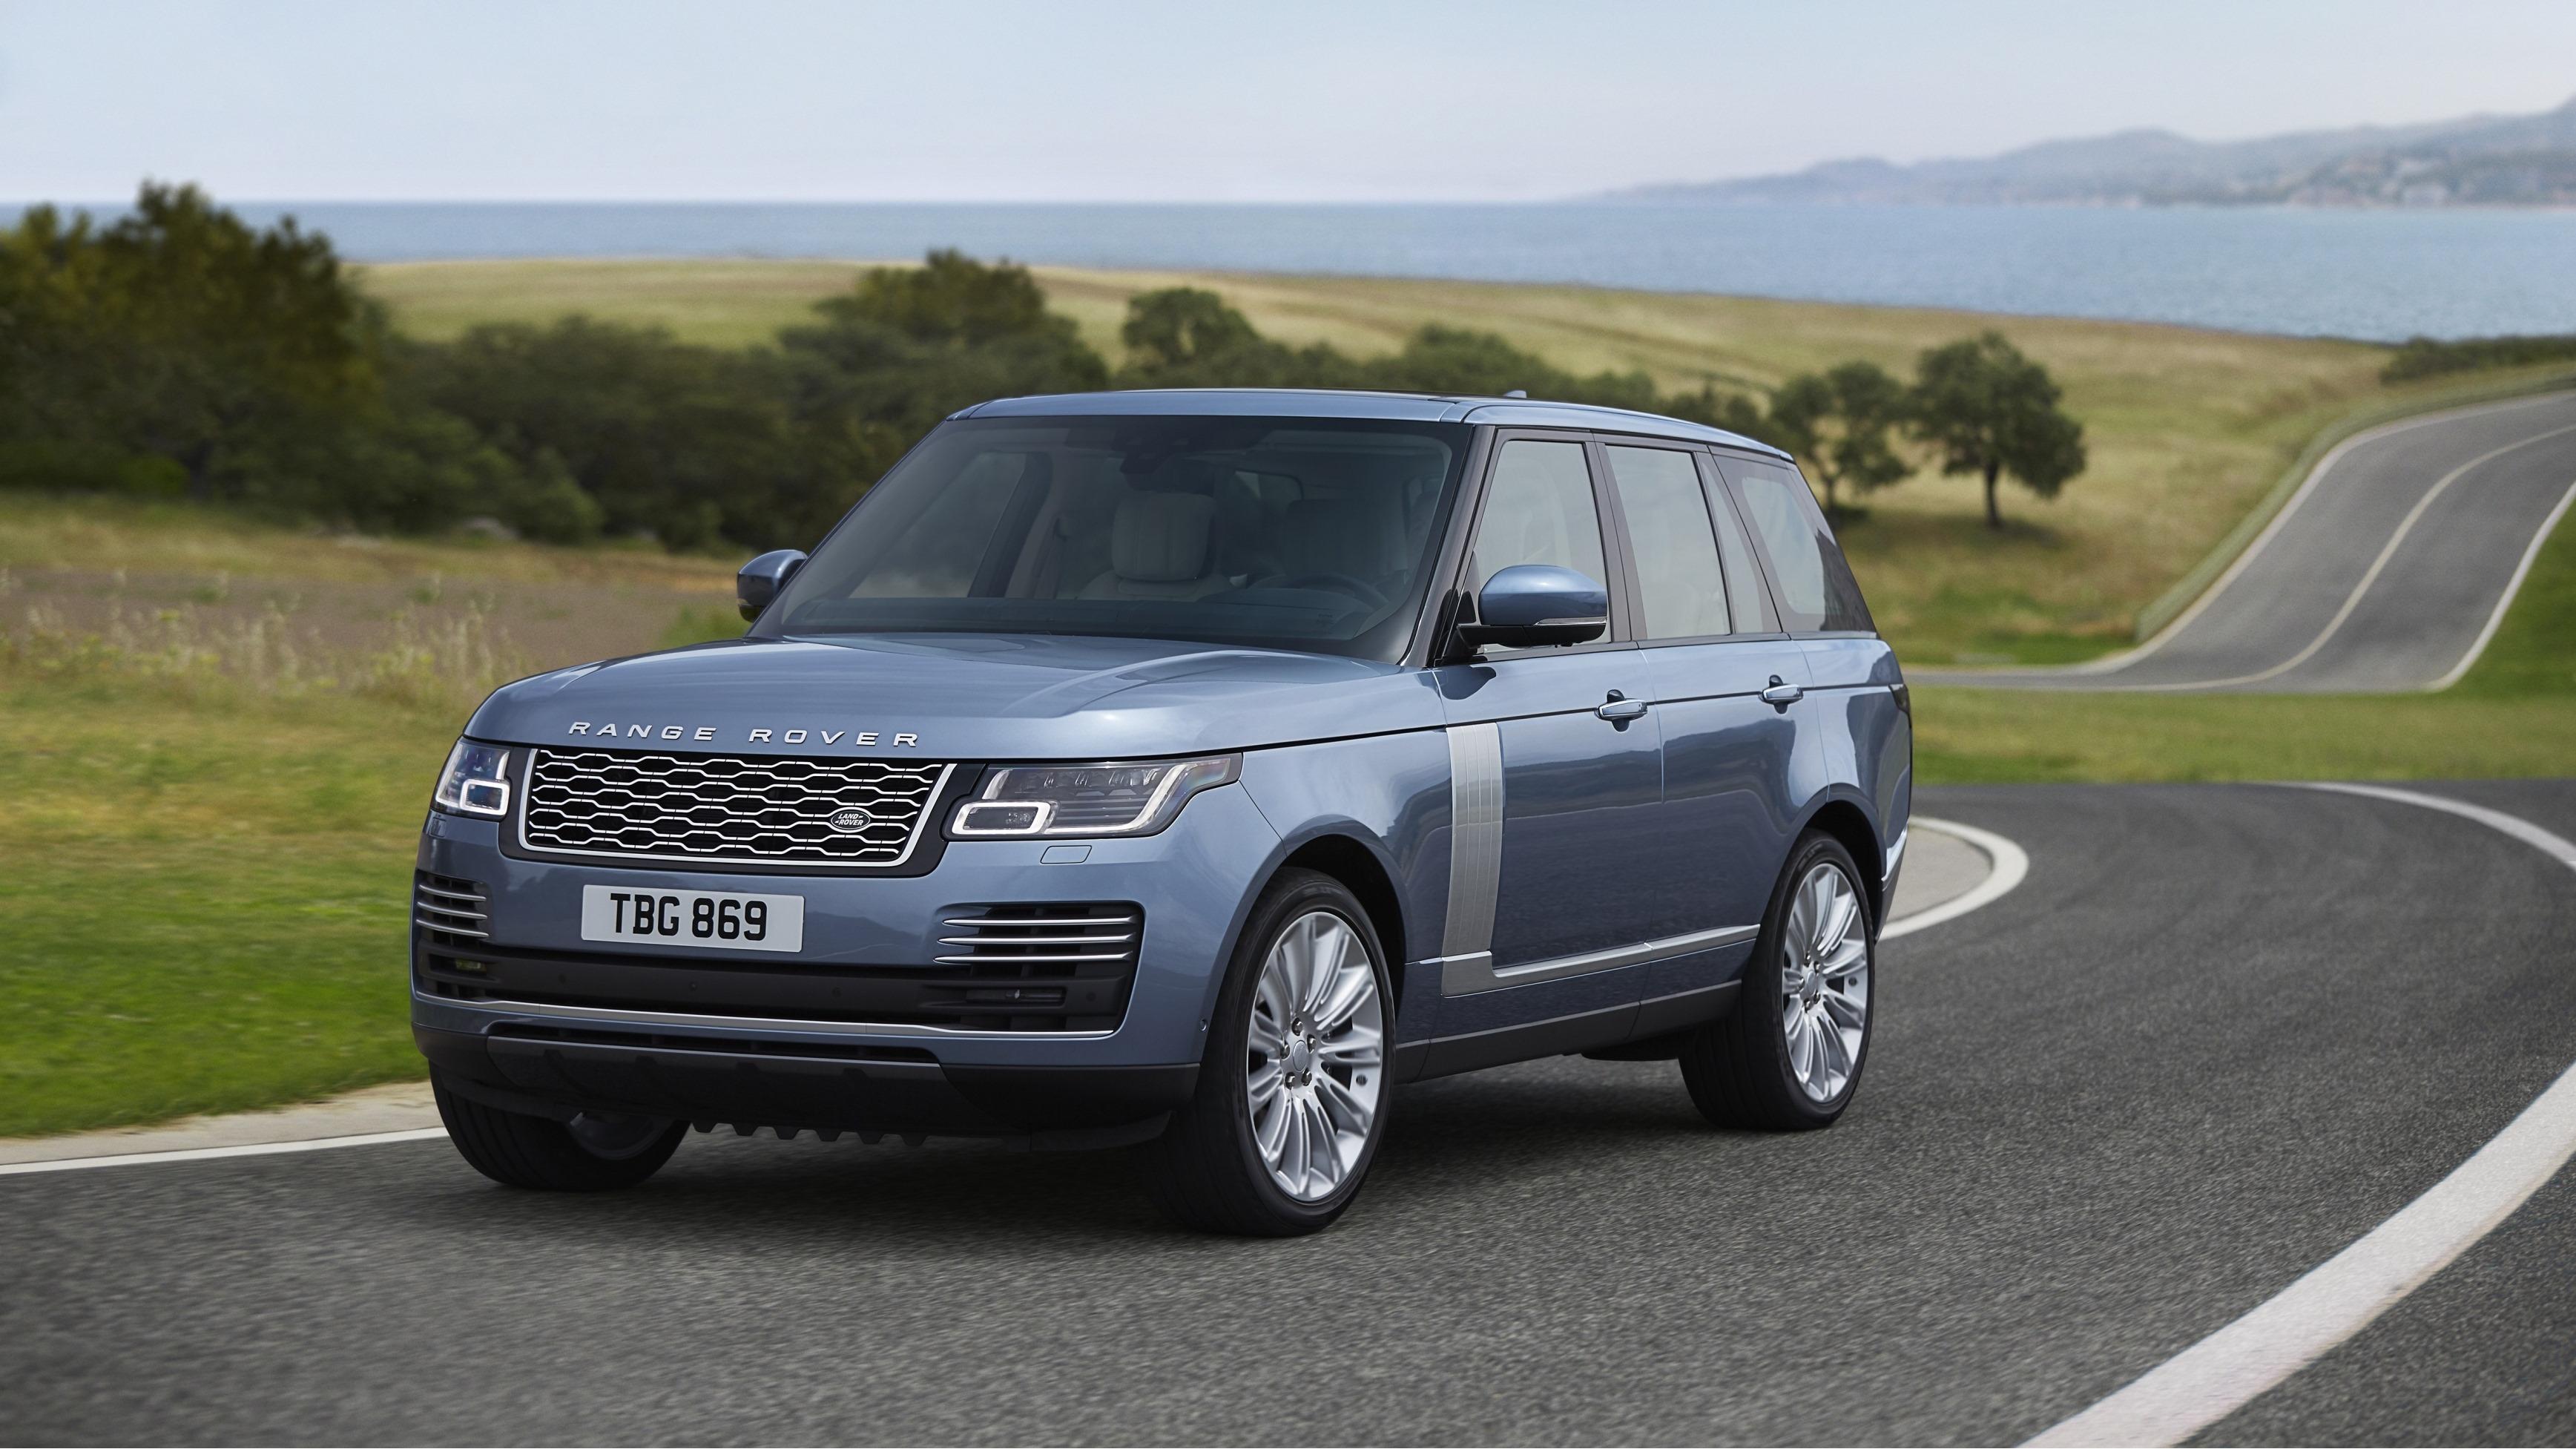 Images Sytner Land Rover Coventry